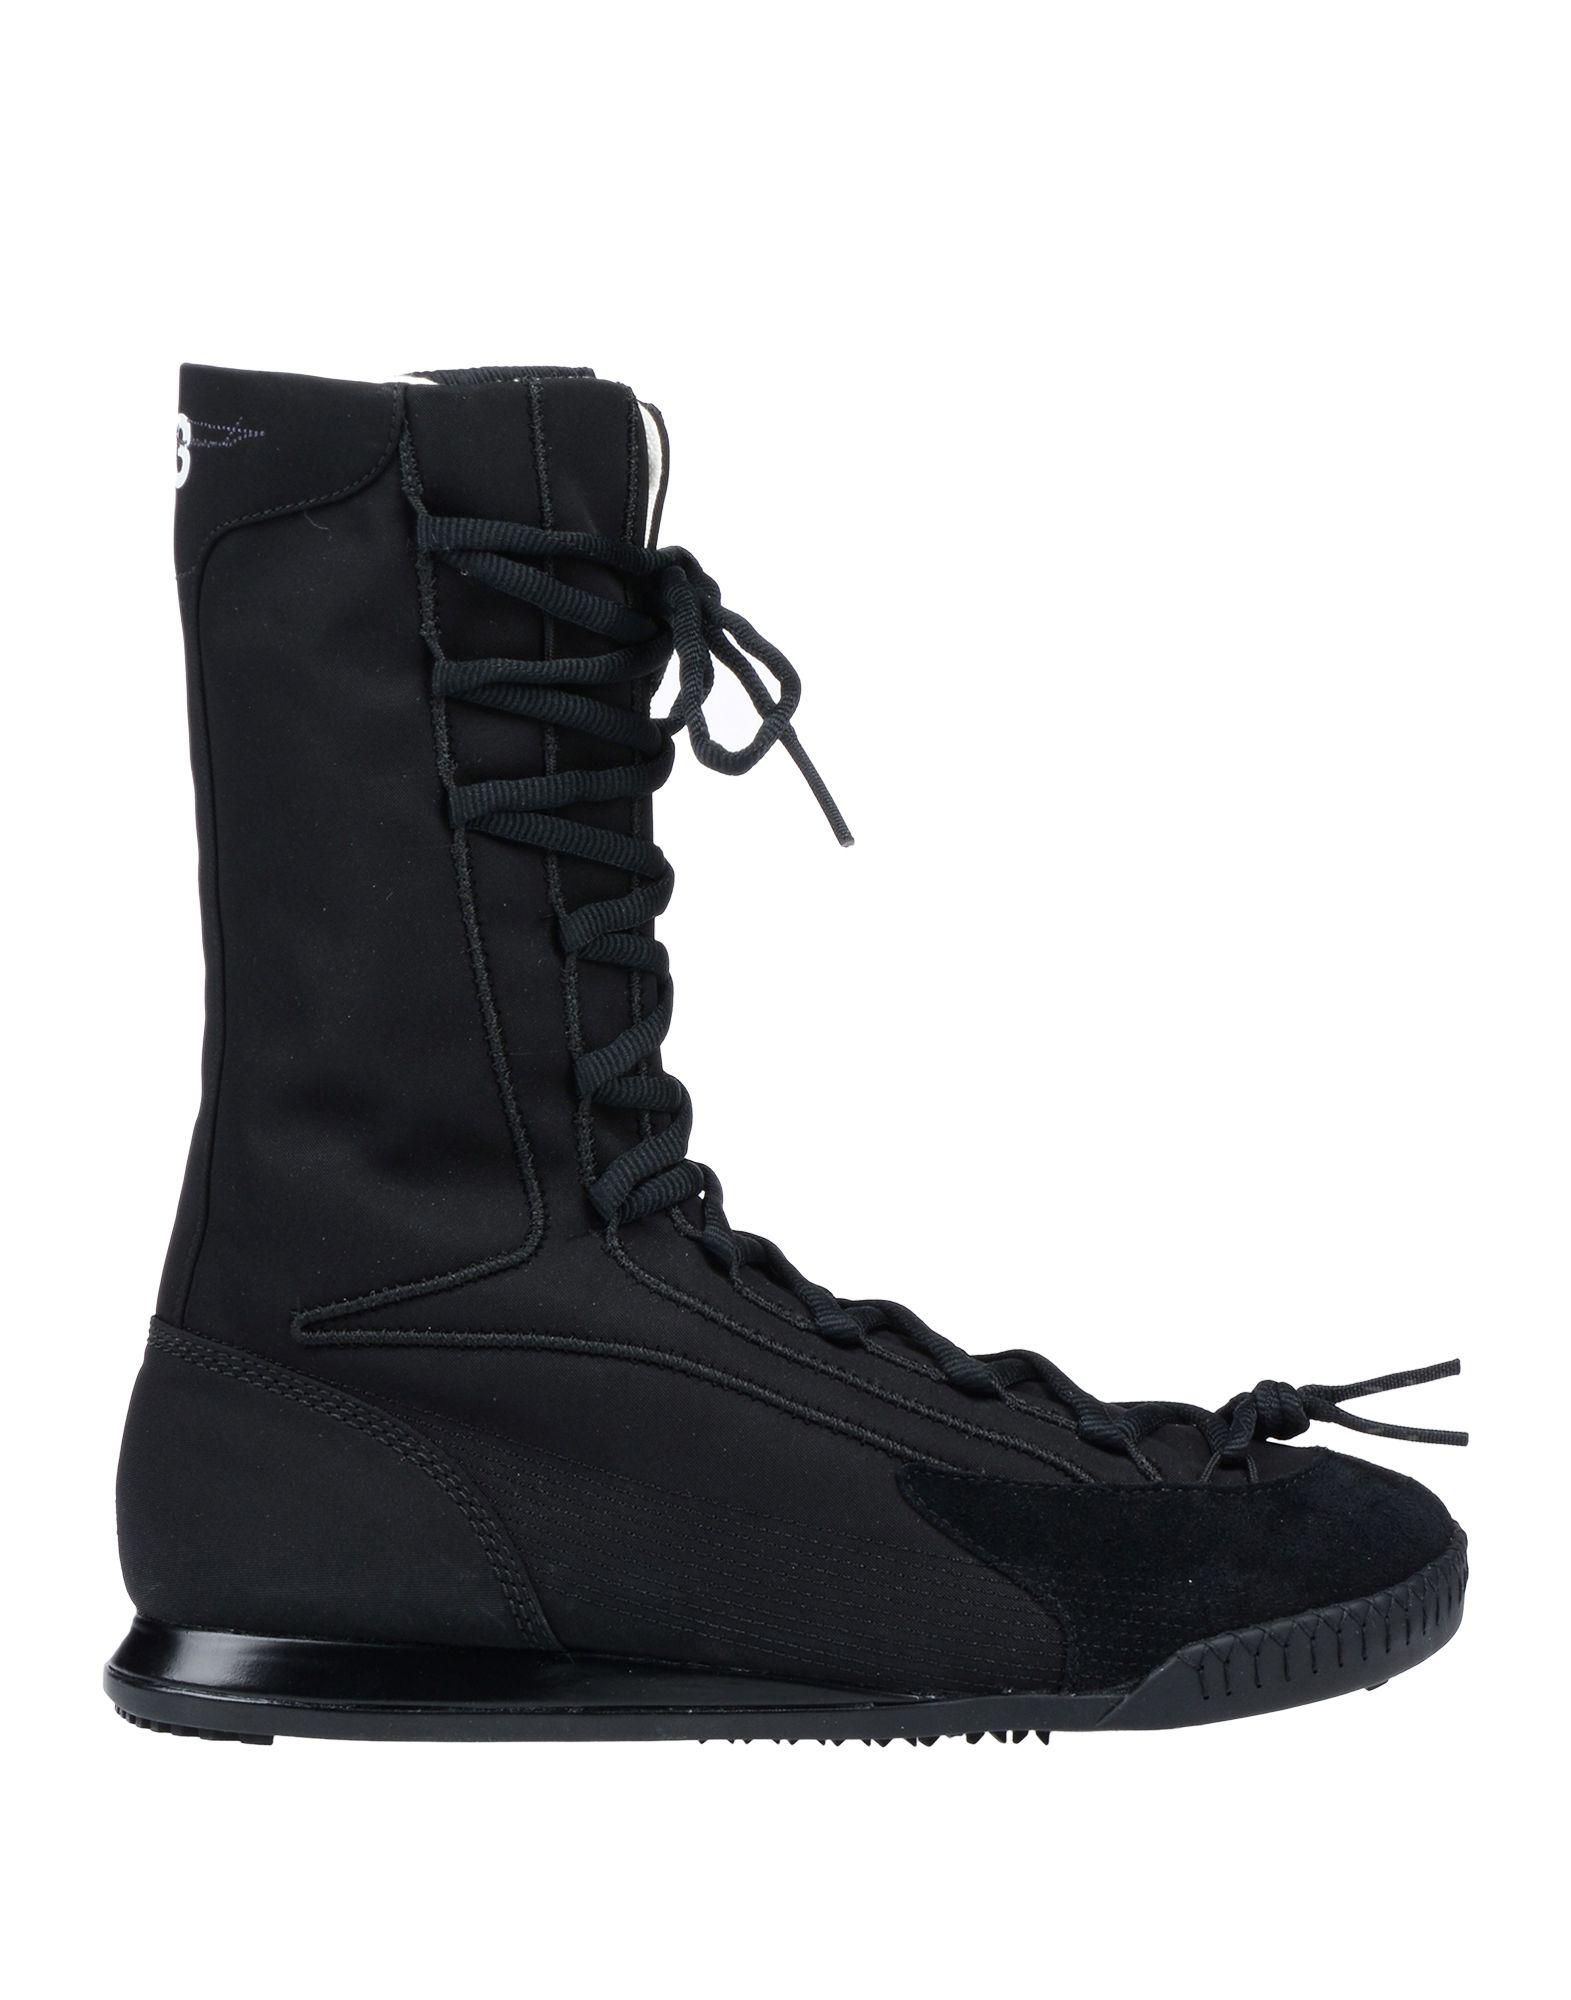 Y-3 Ankle Boots in Black - Lyst